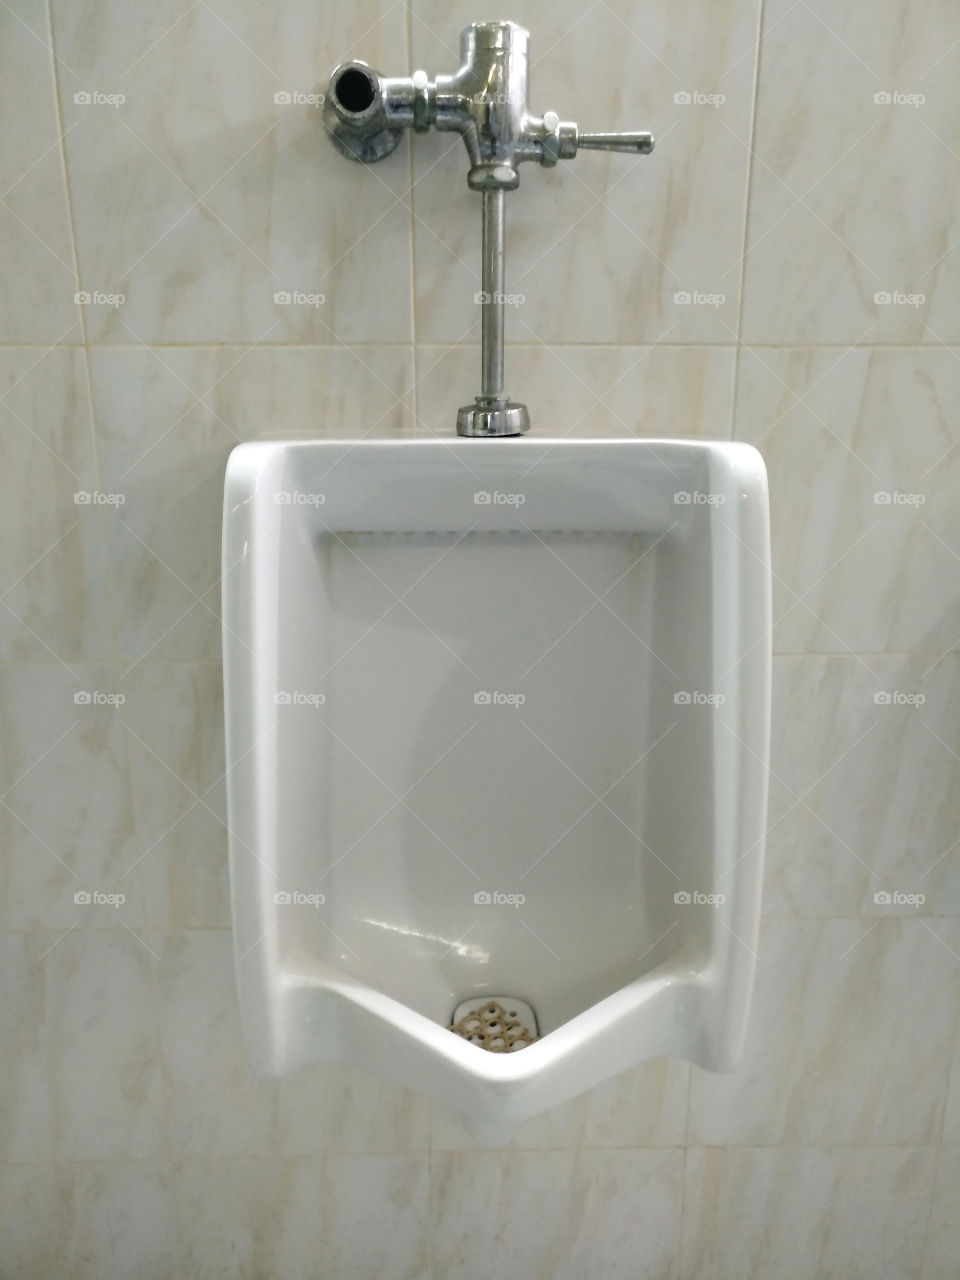 White urinal is mounted in the bathroom.